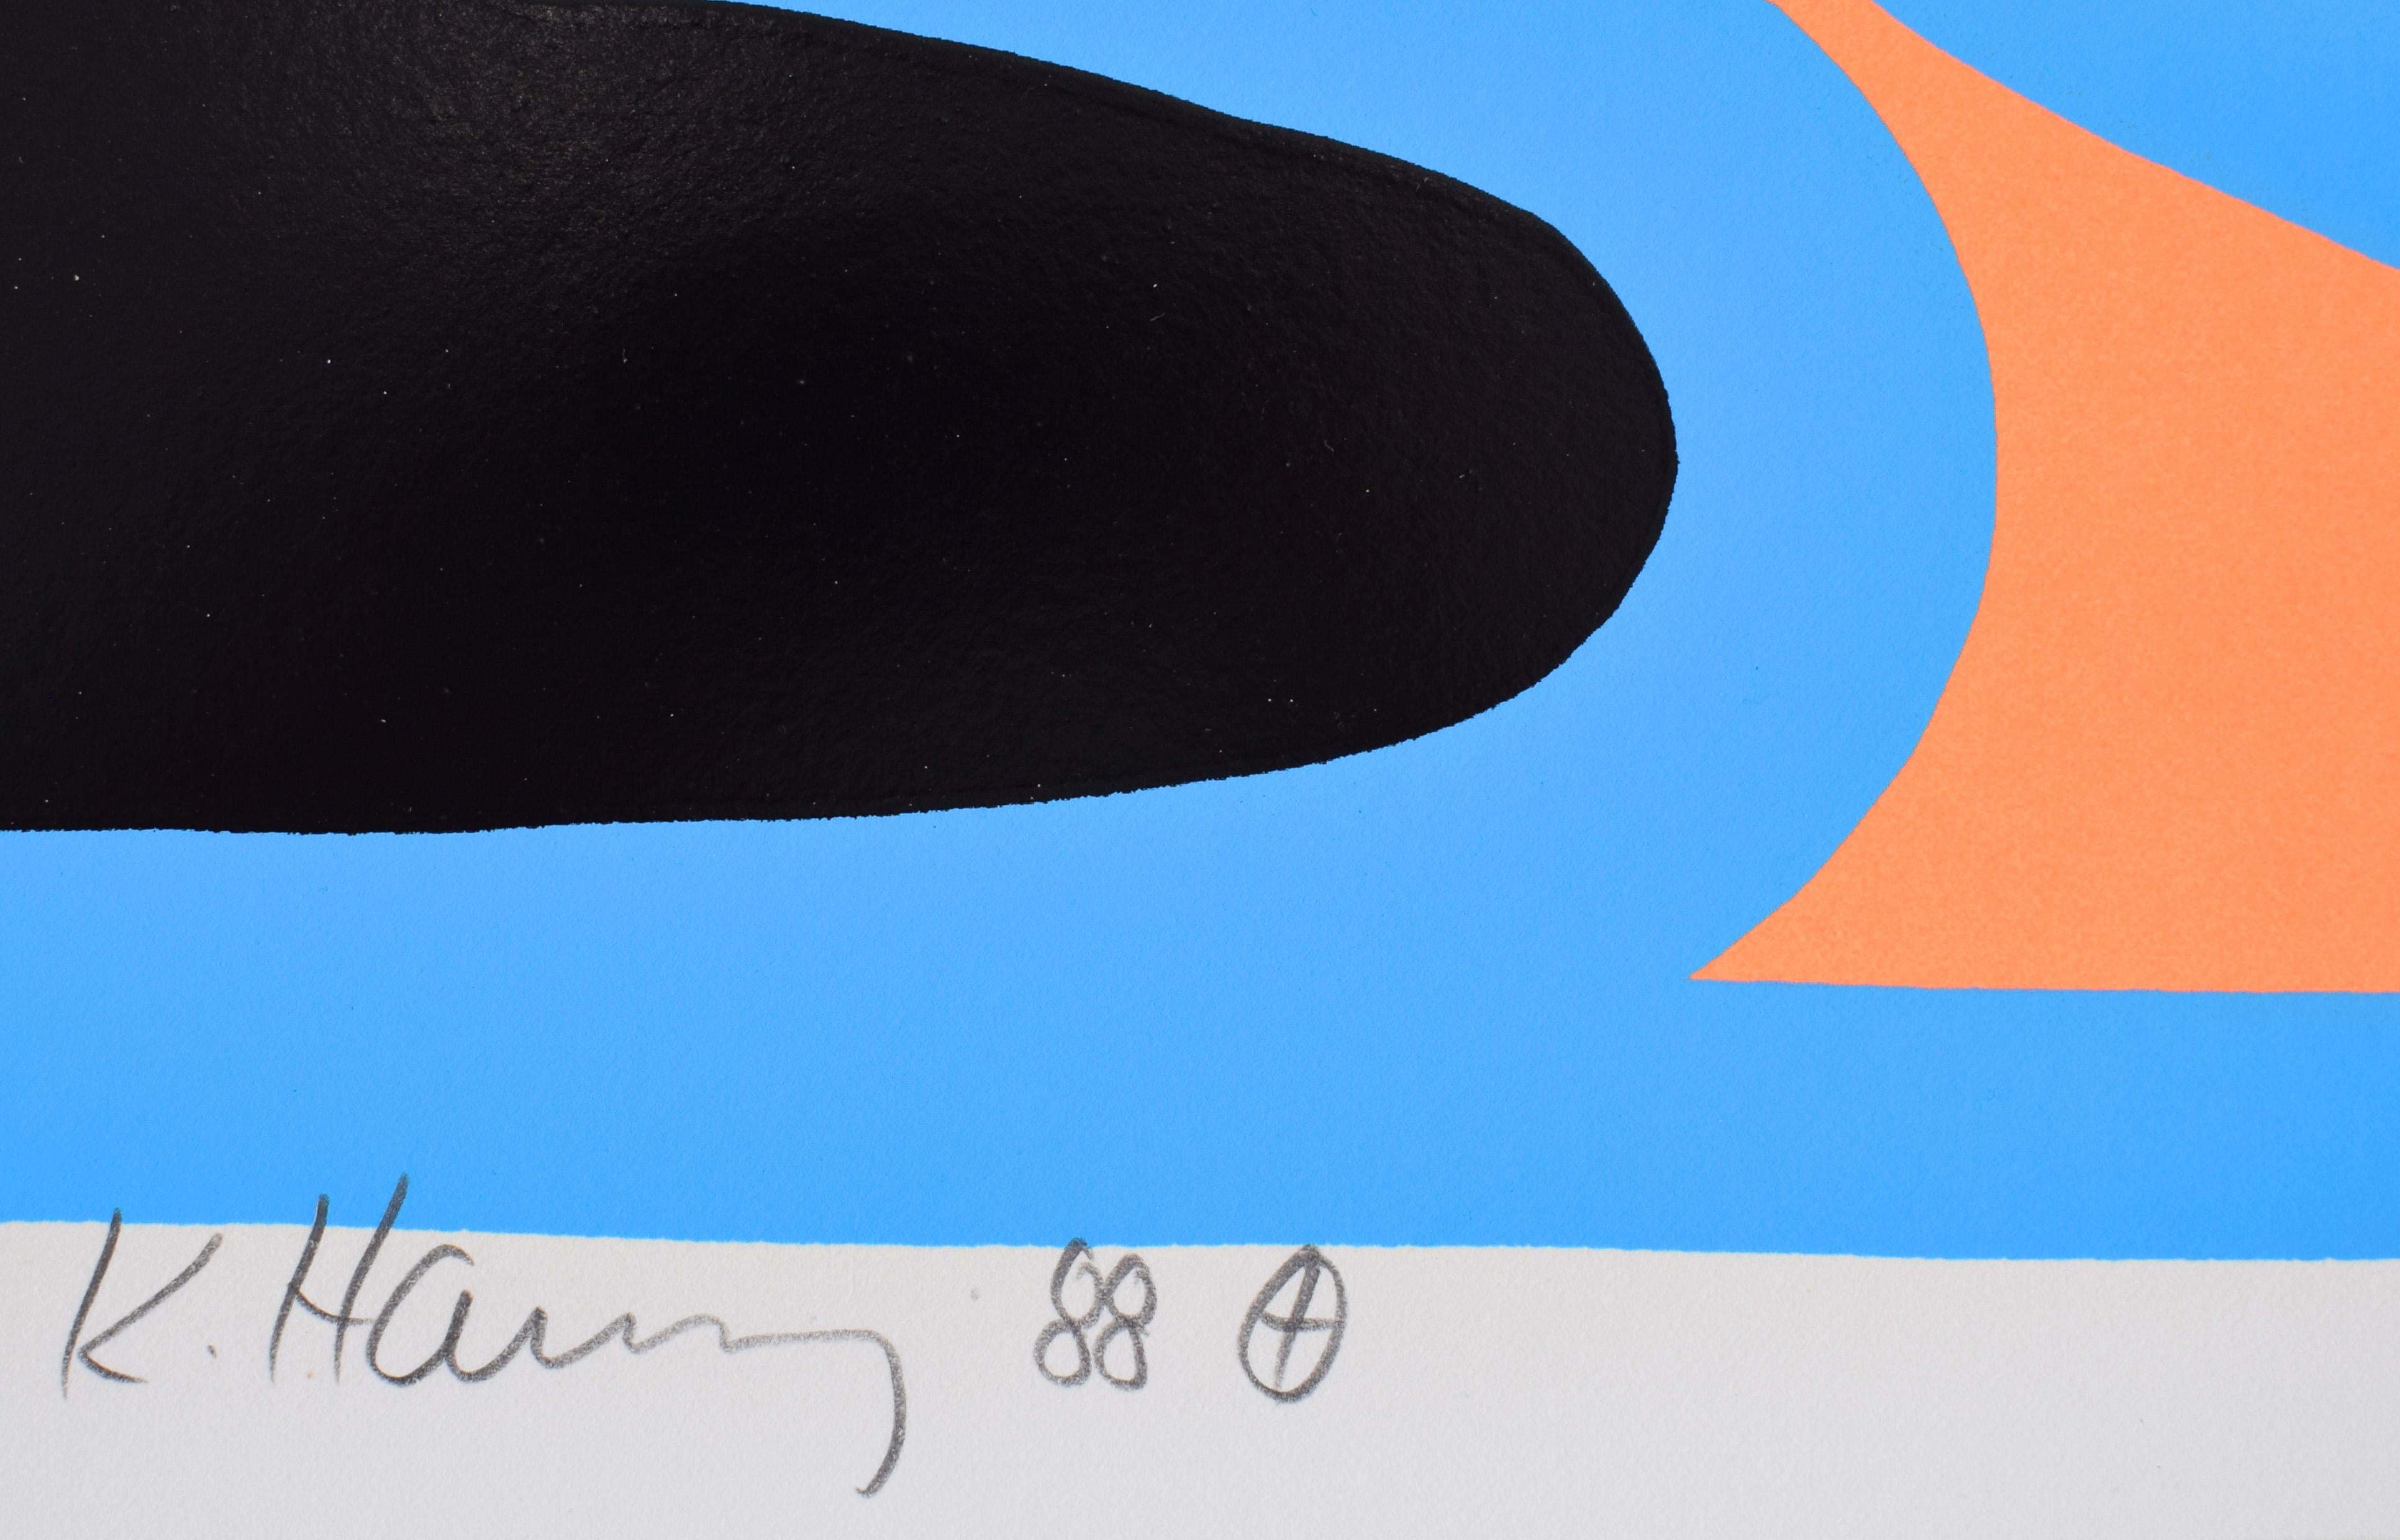 This original screenprint in colours is signed in pencil by the artist “K. Haring” in the lower right margin. 
It is also dated “88” [1988] next to the signature and bears the artist’s cross in circle symbol next to the date.
It is also inscribed